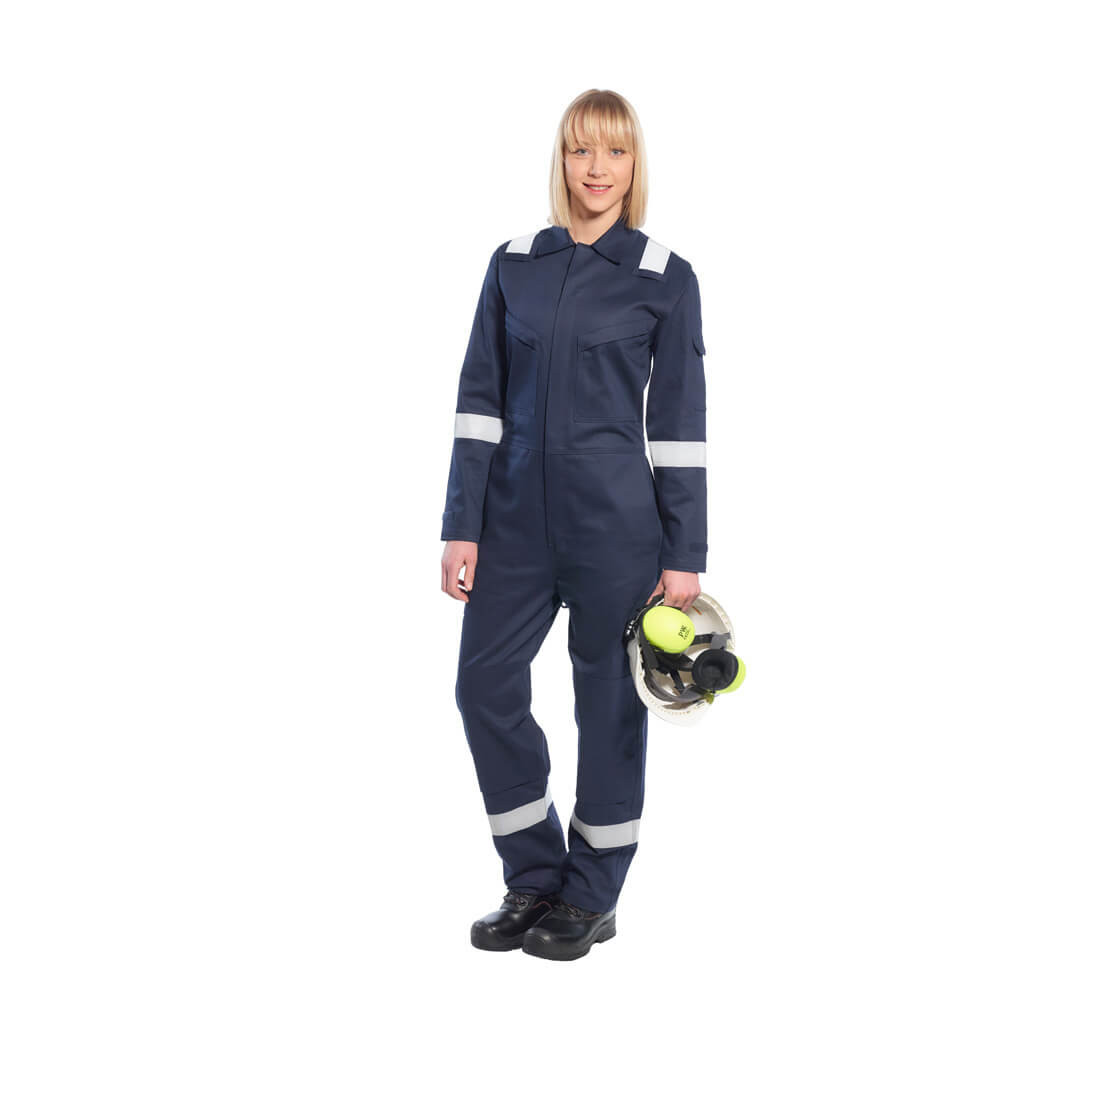 Bizflame Plus Ladies Coverall 350g - Safetywear